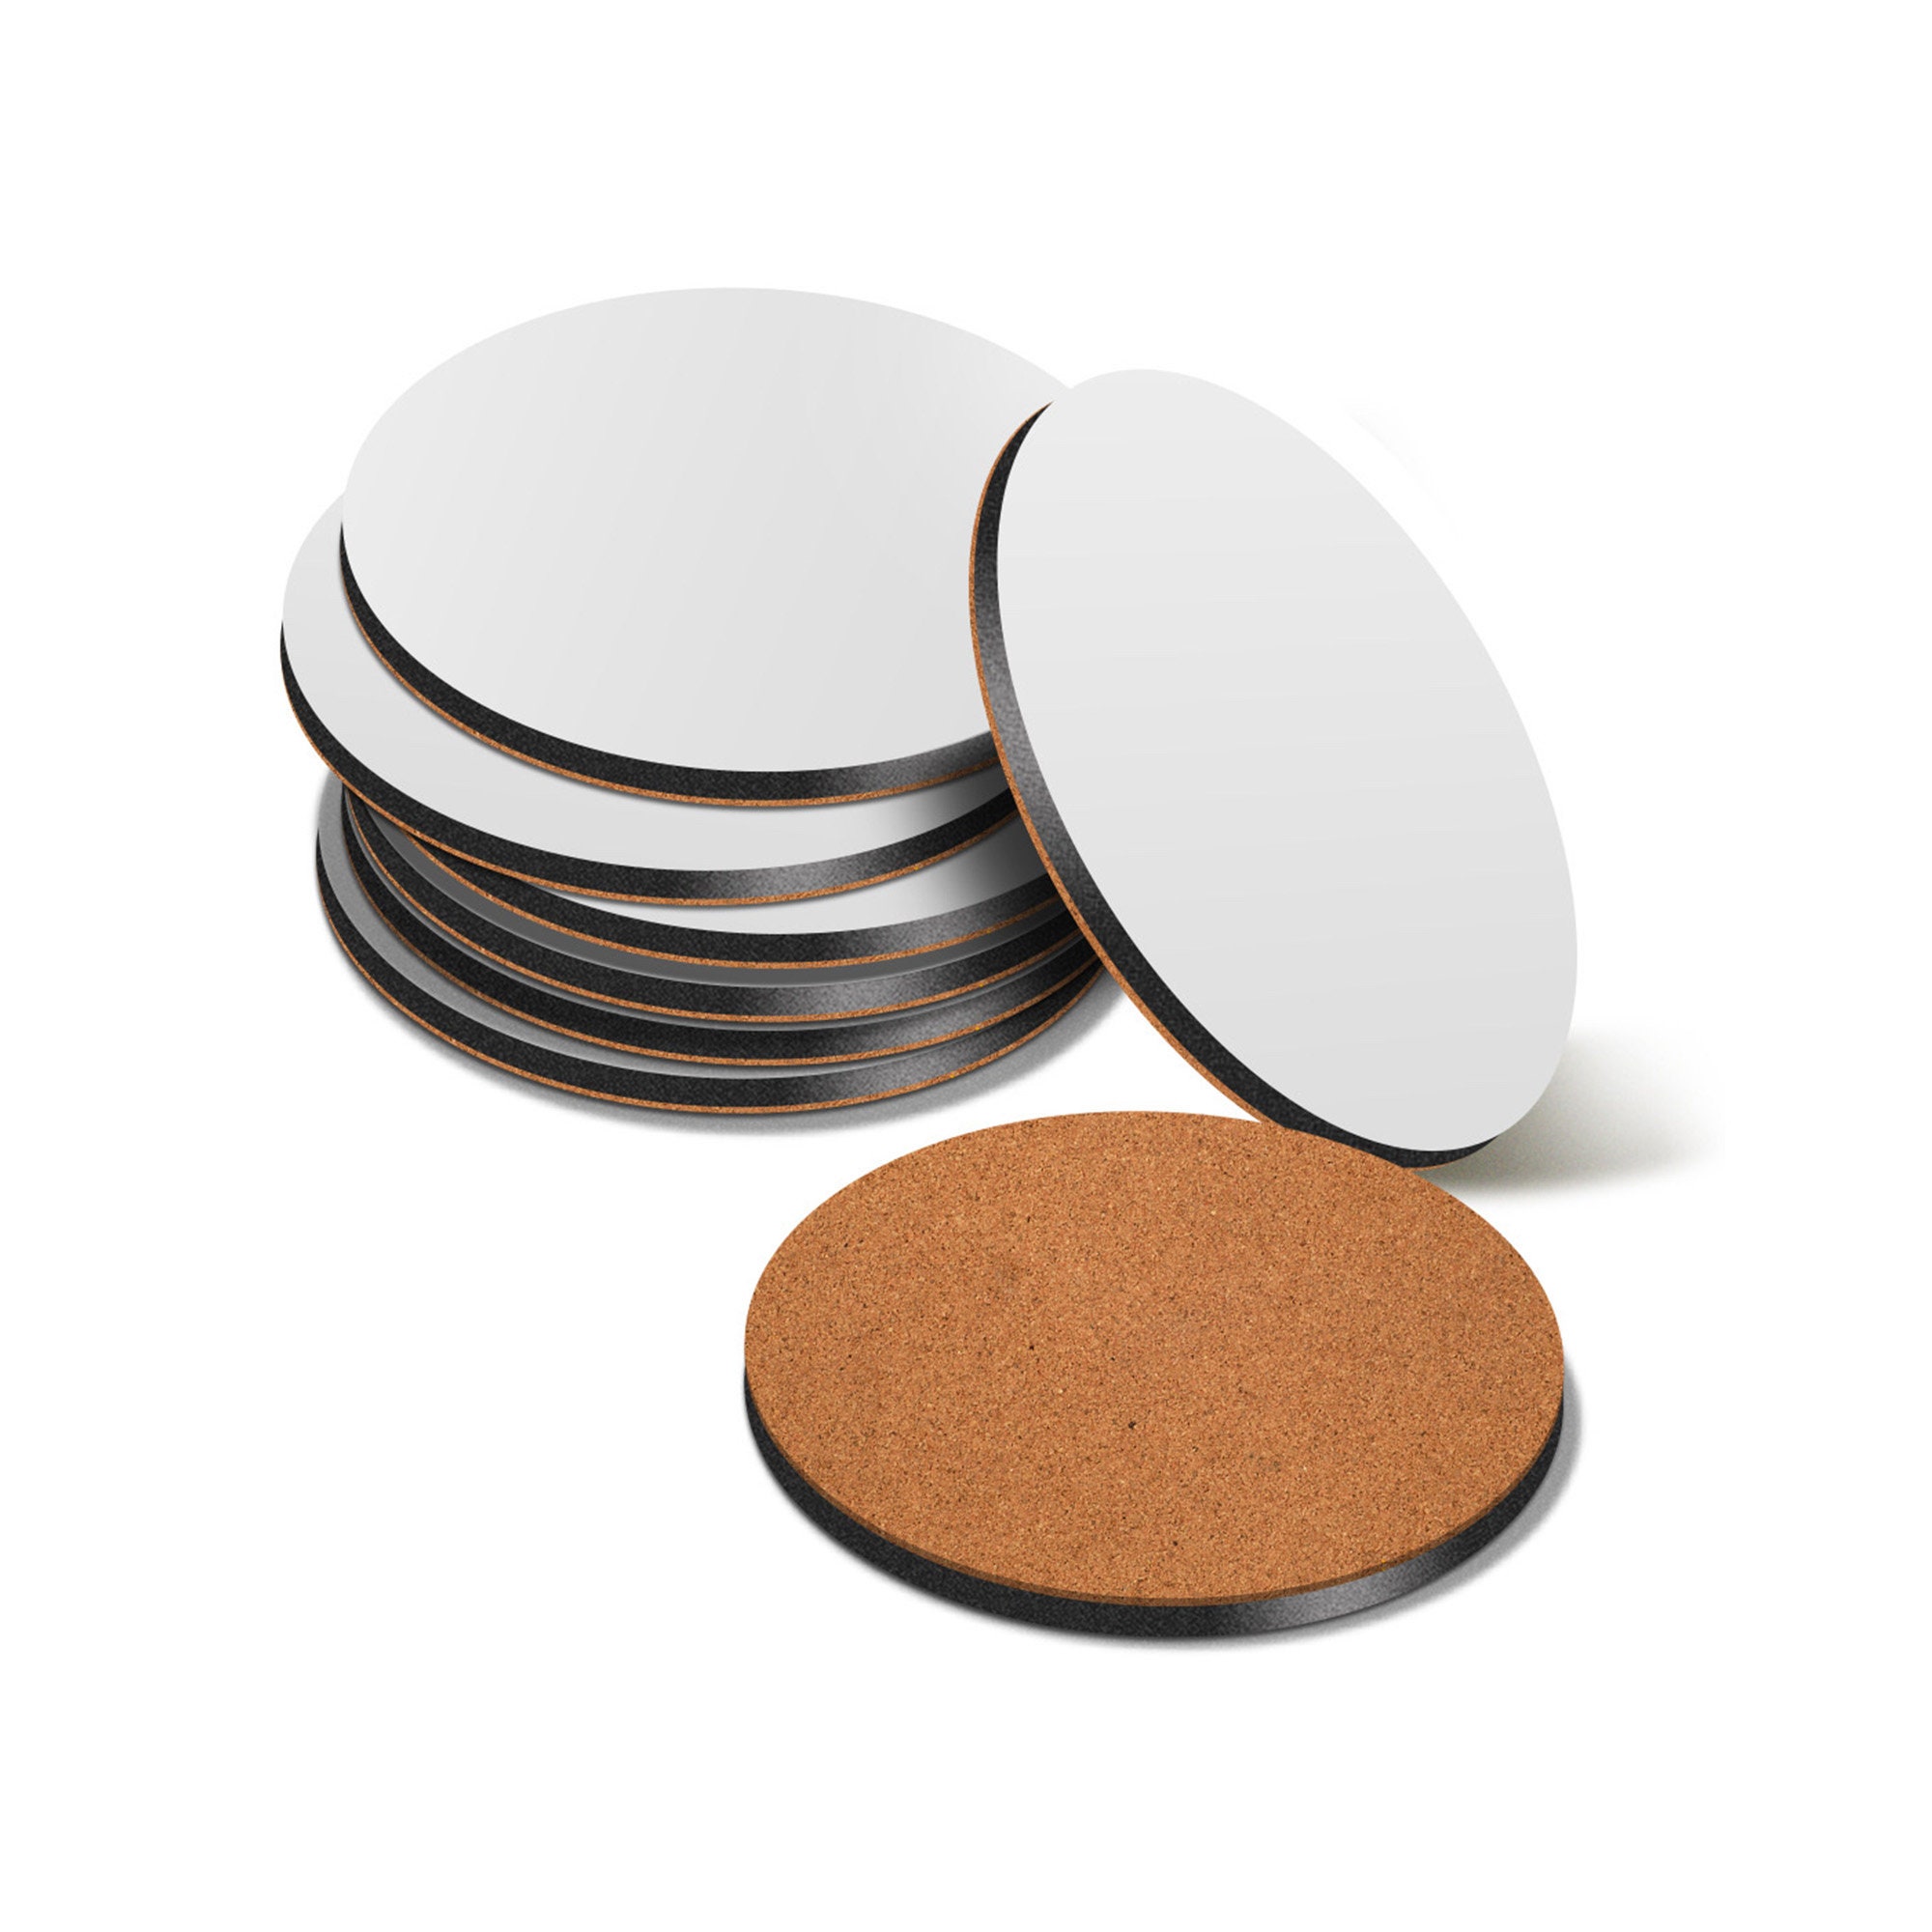 Round cardboard coasters - Pack of 6 pieces for sublimation